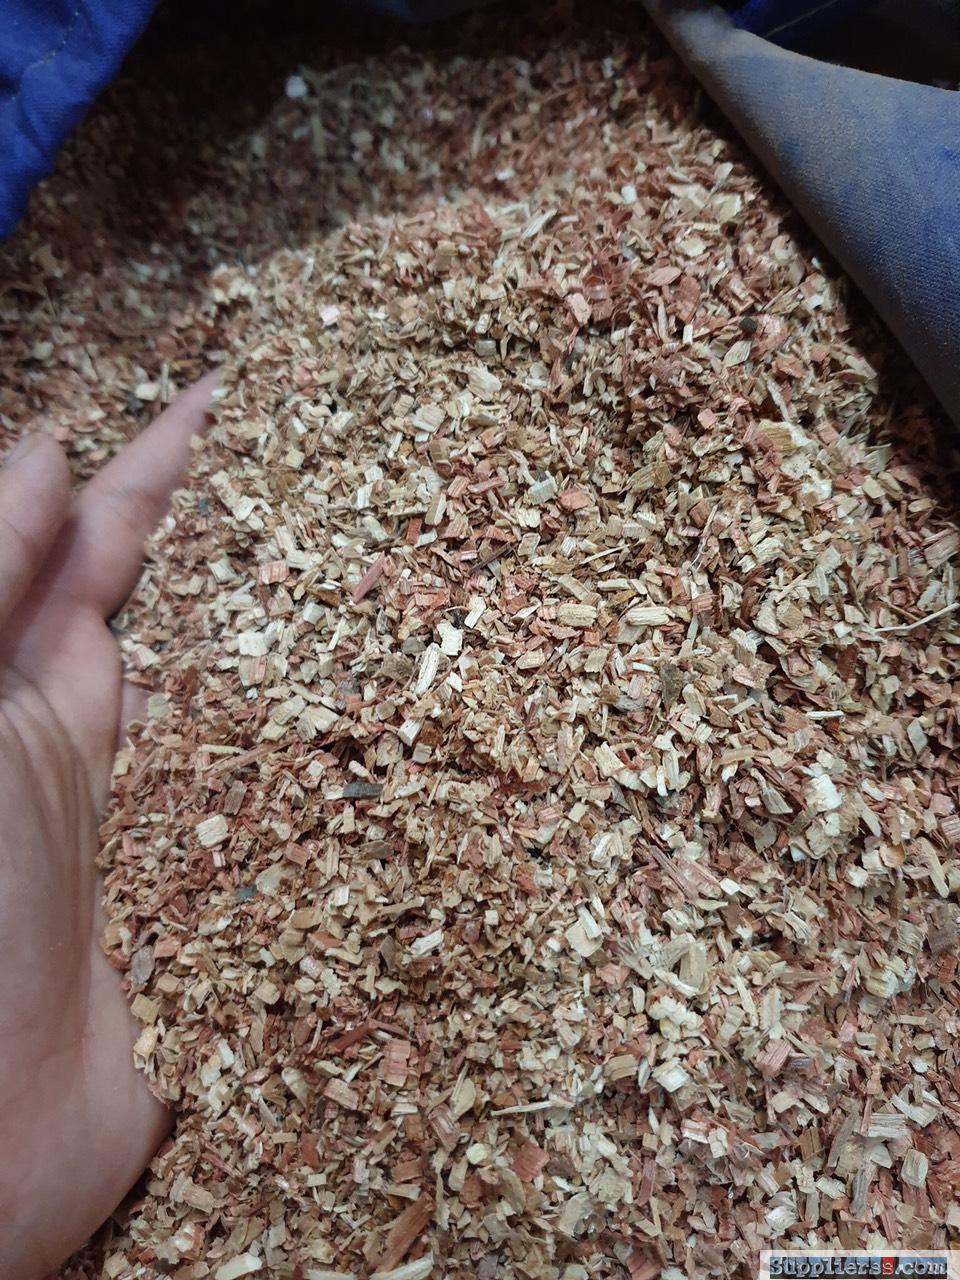 WOOD CHIPS FOR SALE